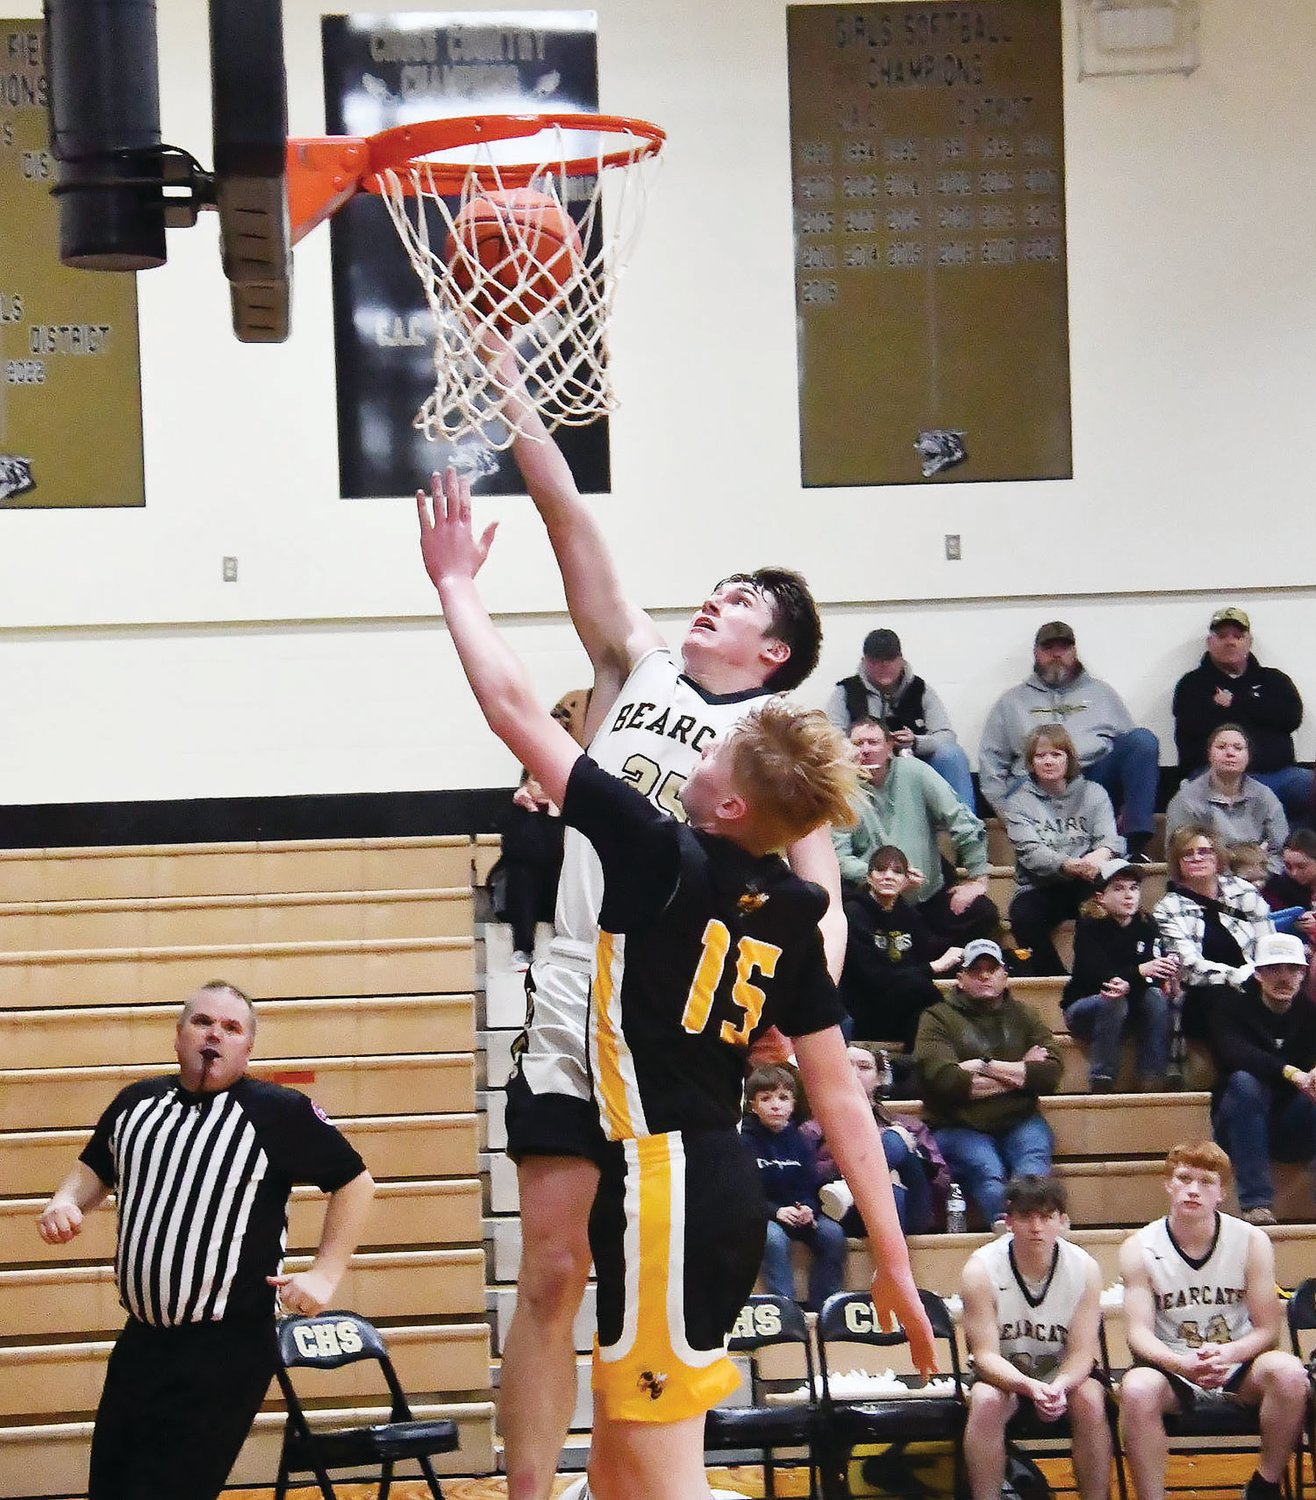 Cairo's Logan Head tallied 22 points to lead all scorers during a 57-47 Central Activities Conference victory on Thursday, Jan. 12.